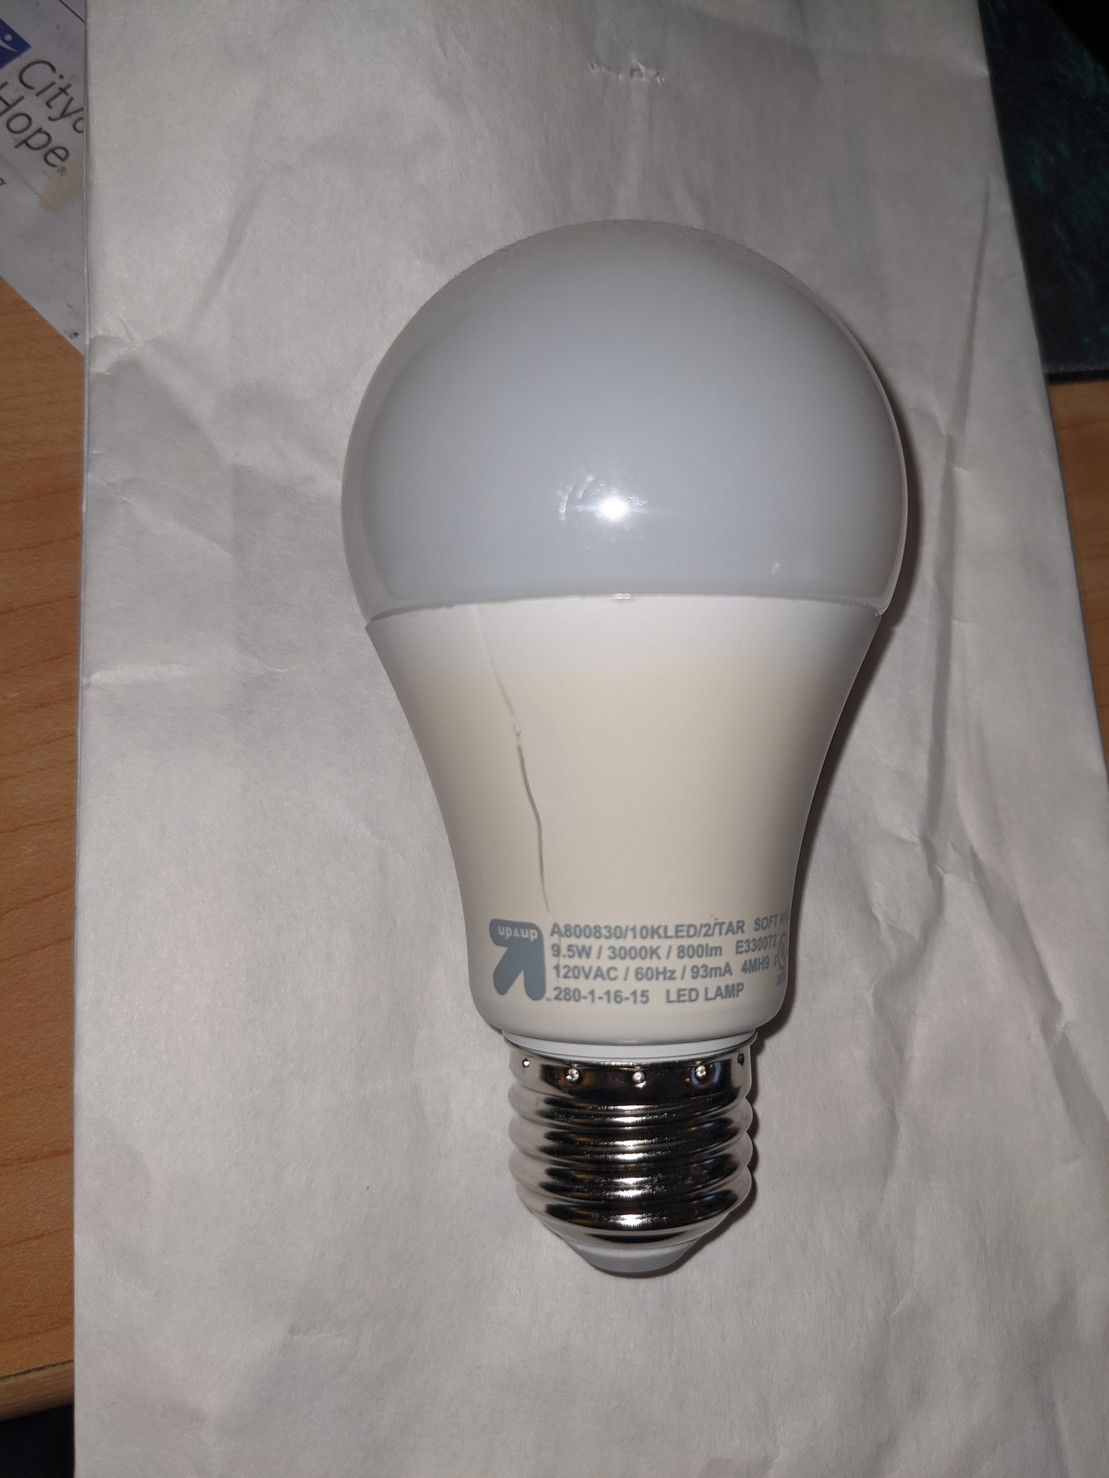 First LED bulb to burn out. It wasn't completely off like an incandescent or flickering ...